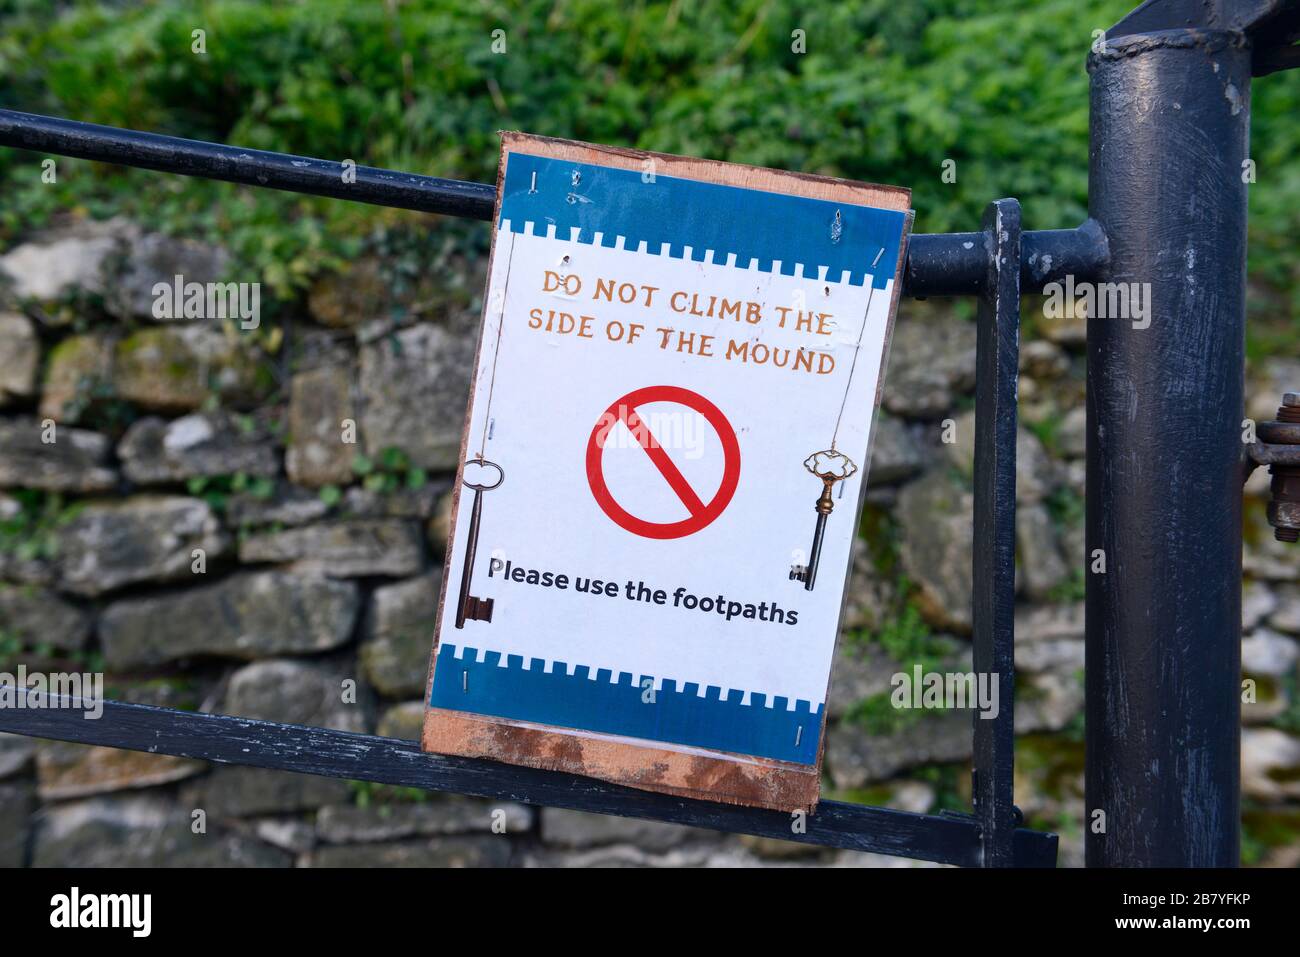 Do not climb the side of the mound notice at the old Motte and Bailey mound in Oxford castle, Oxford, UK Stock Photo